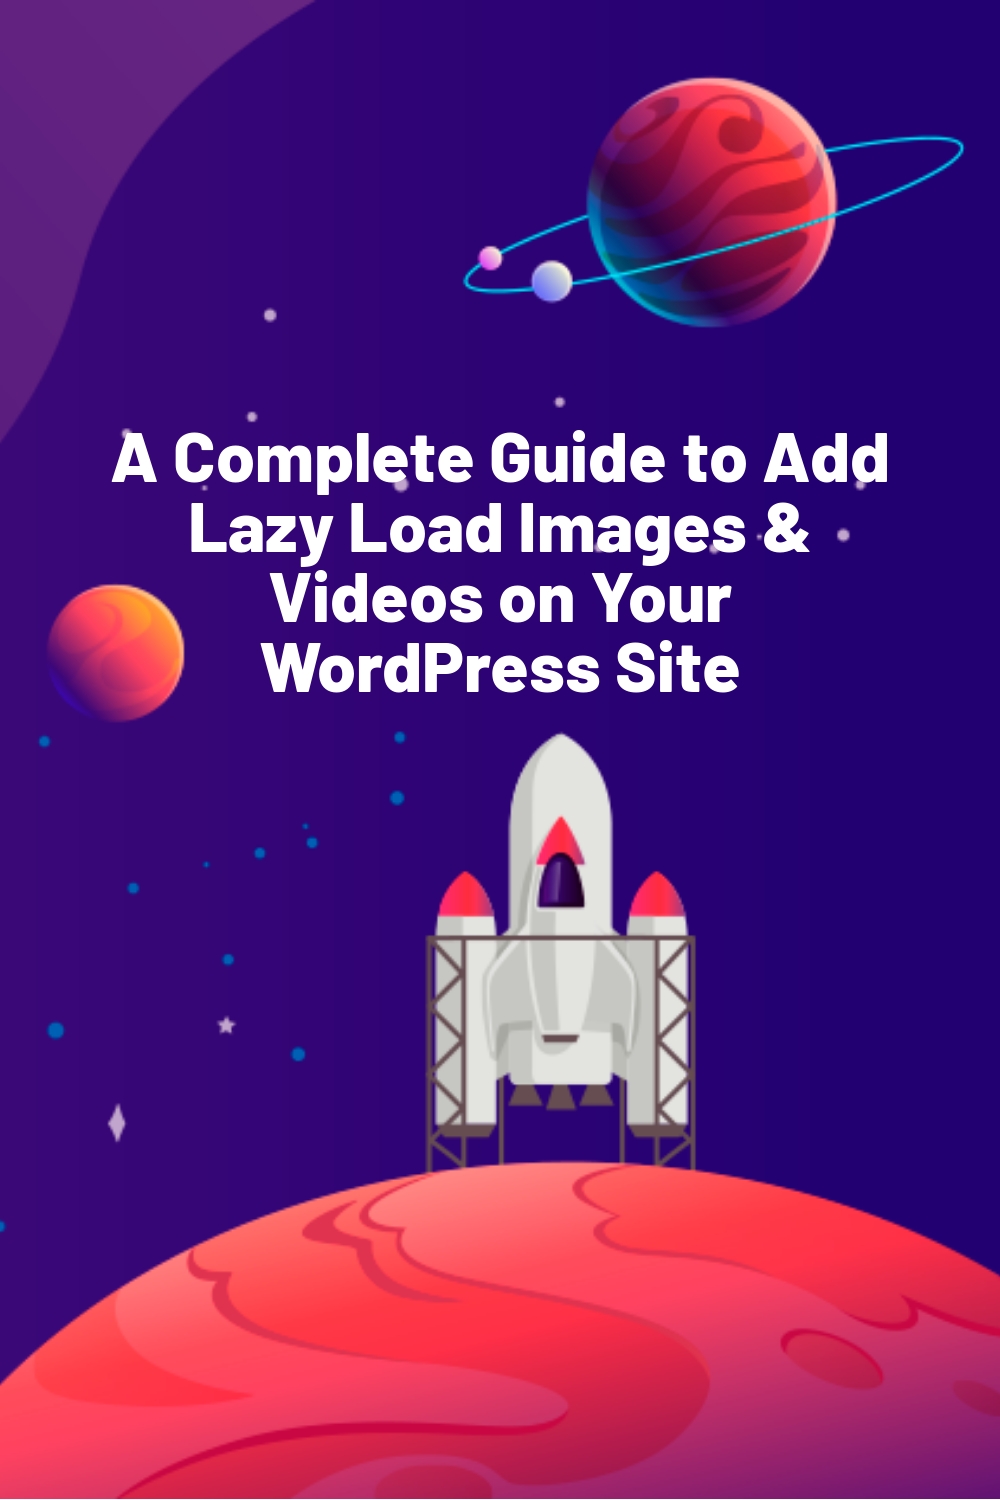 A Complete Guide to Add Lazy Load Images & Videos on Your WordPress Site